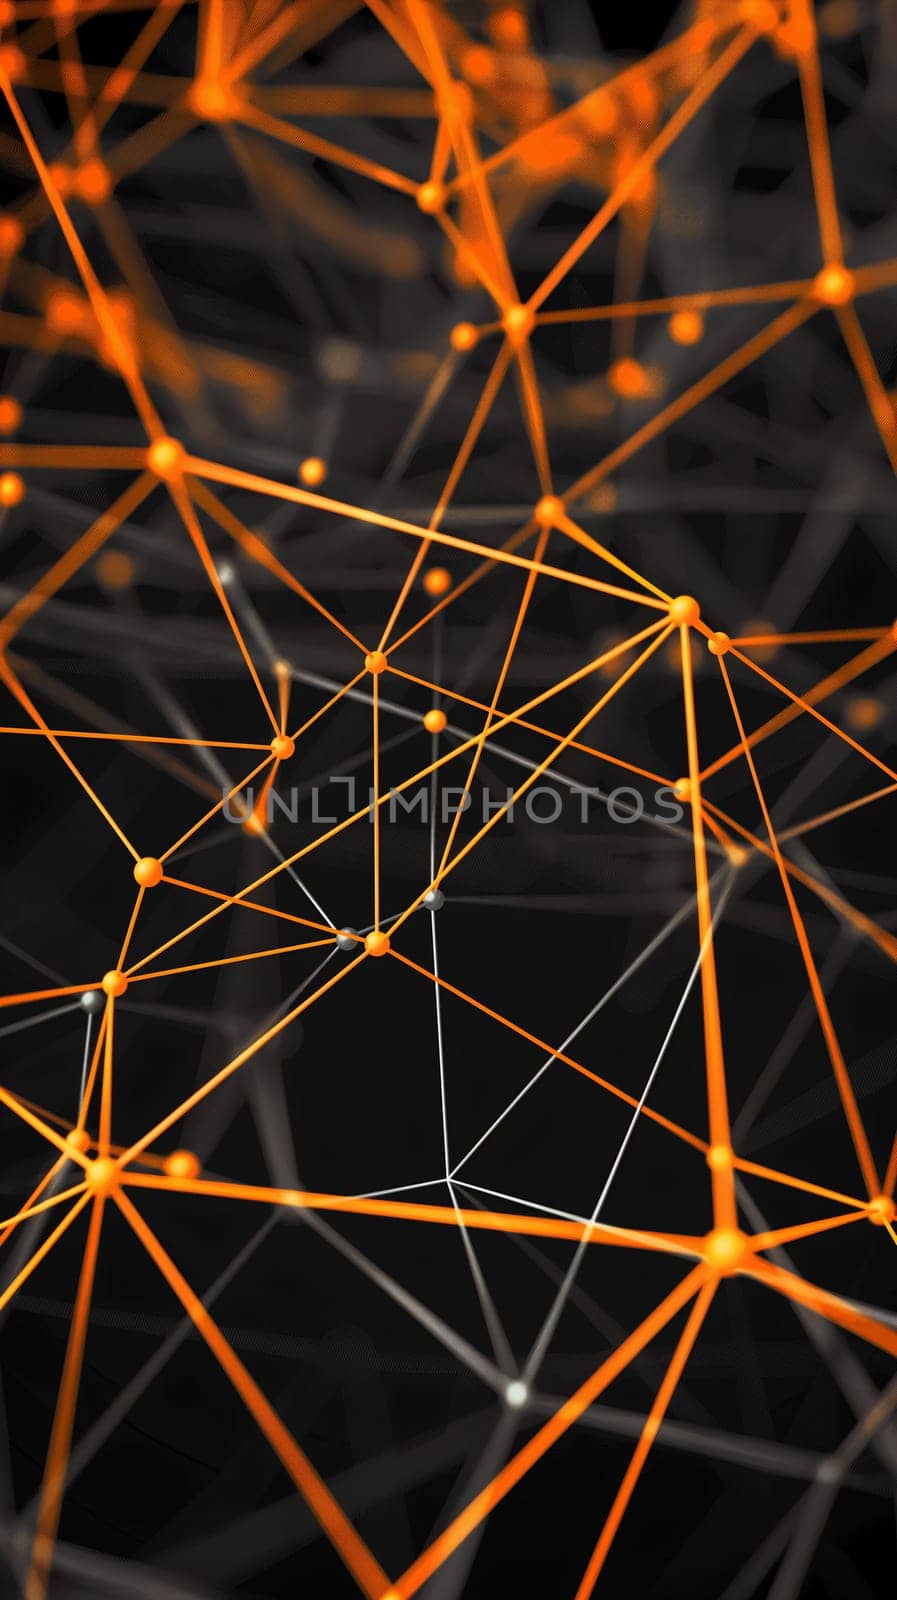 Intricate Network of Orange Lines Creating an Abstract Geometric Pattern by chrisroll